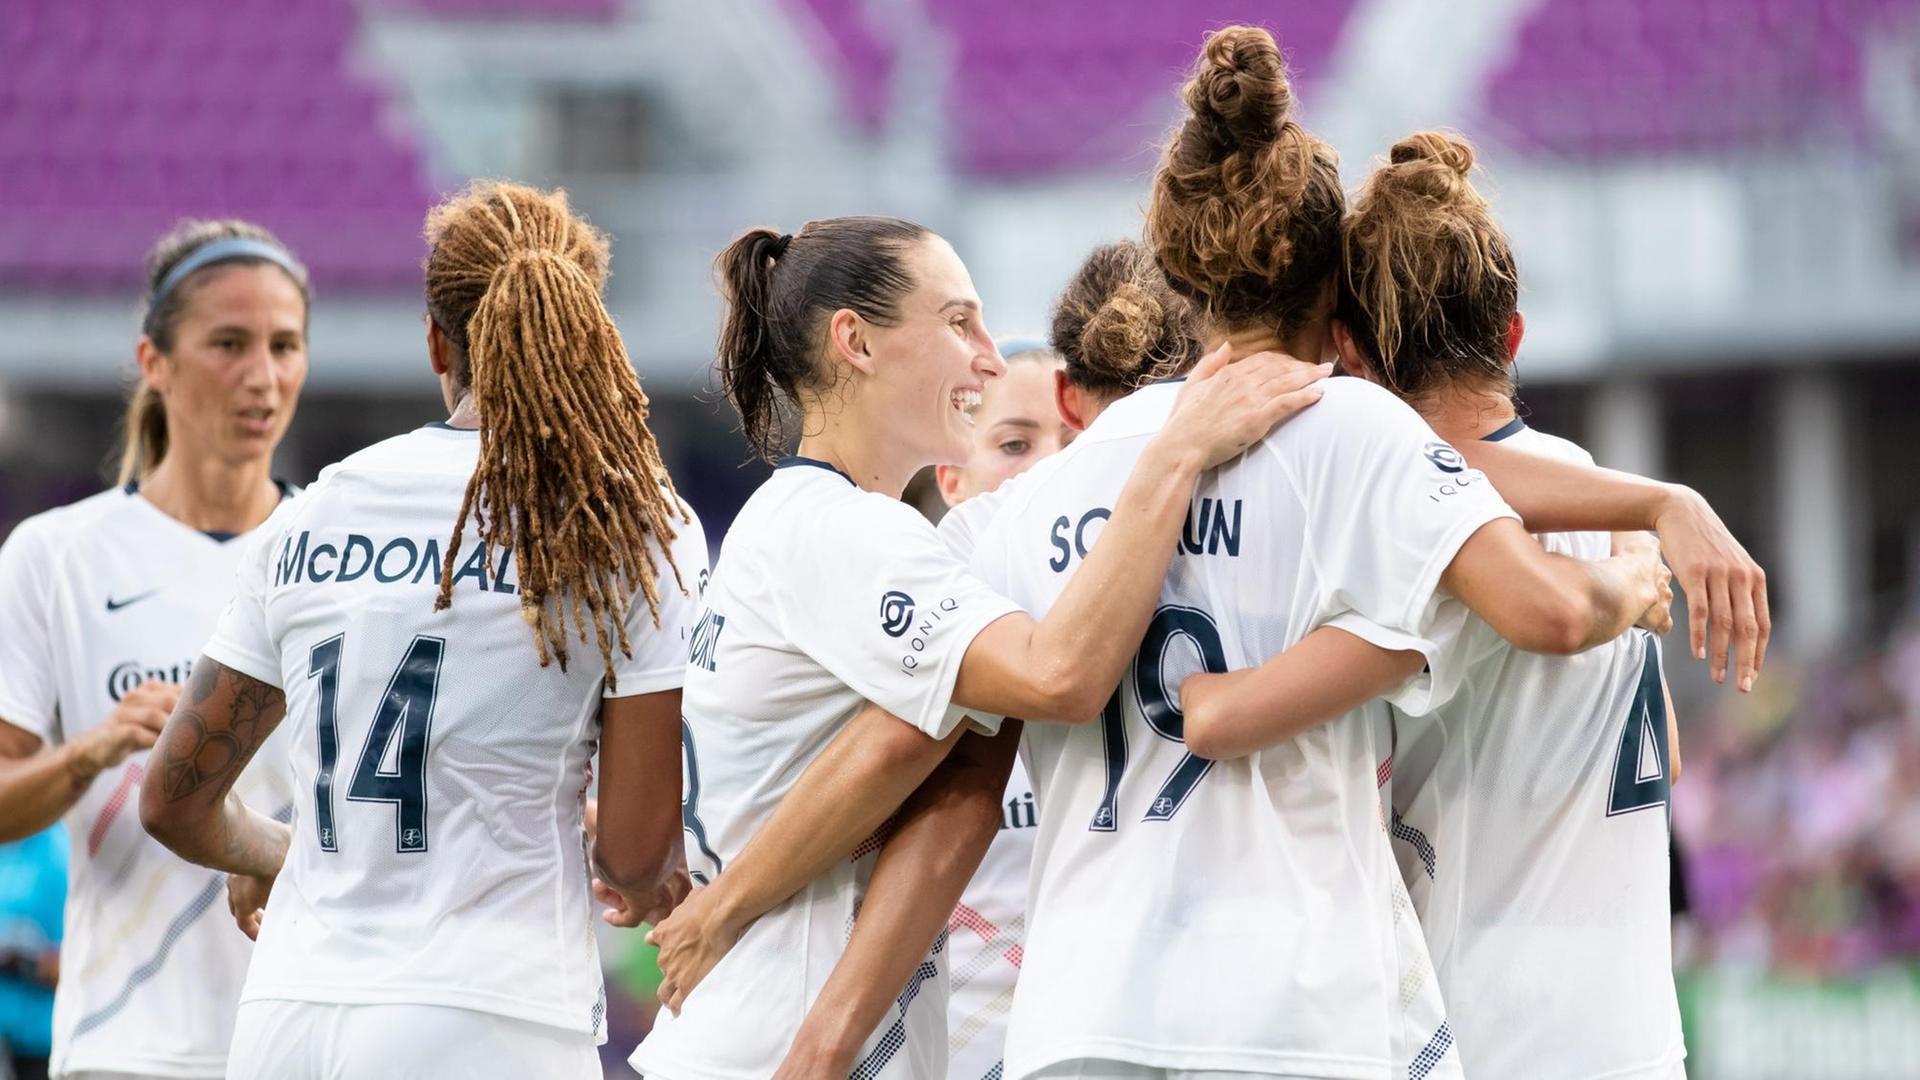 July 5, 2021, Orlando, Florida, United States: Orlando, Florida, July 4th 2021: North Carolina Courage players celebrate Havana Solaun (19 North Carolina Courage) scoring their second goal during the National Women's Soccer League game between Orlando Pride and North Carolina Courage at Exploria Stadium in Orlando, Florida. NO COMMERCIAL USAGE. (Credit Image: Â© Andrea Vilchez/Sport Press Photo via ZUMA Press